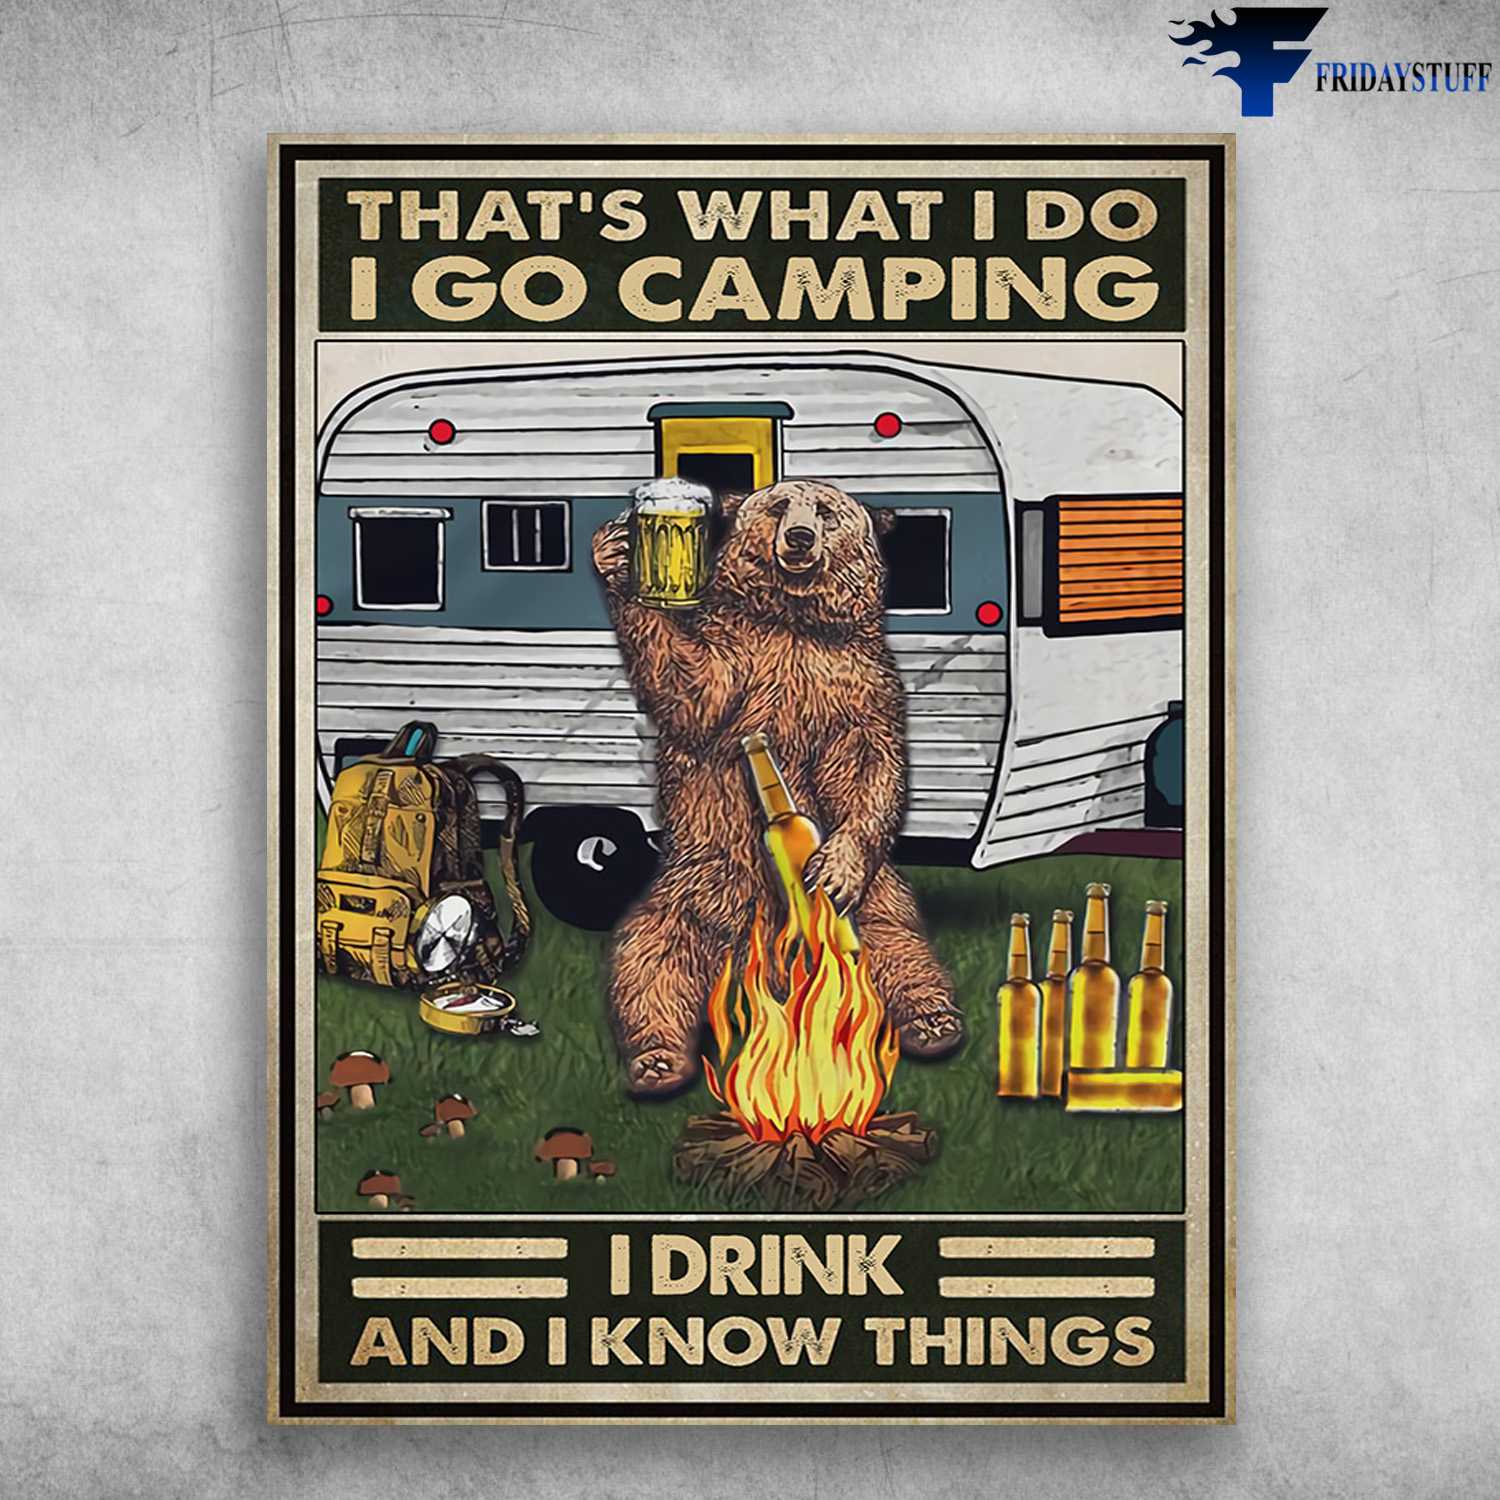 Bear Beer, Camping Lover - That's What I Do, I Go Camping, I Drink, And I Know Things